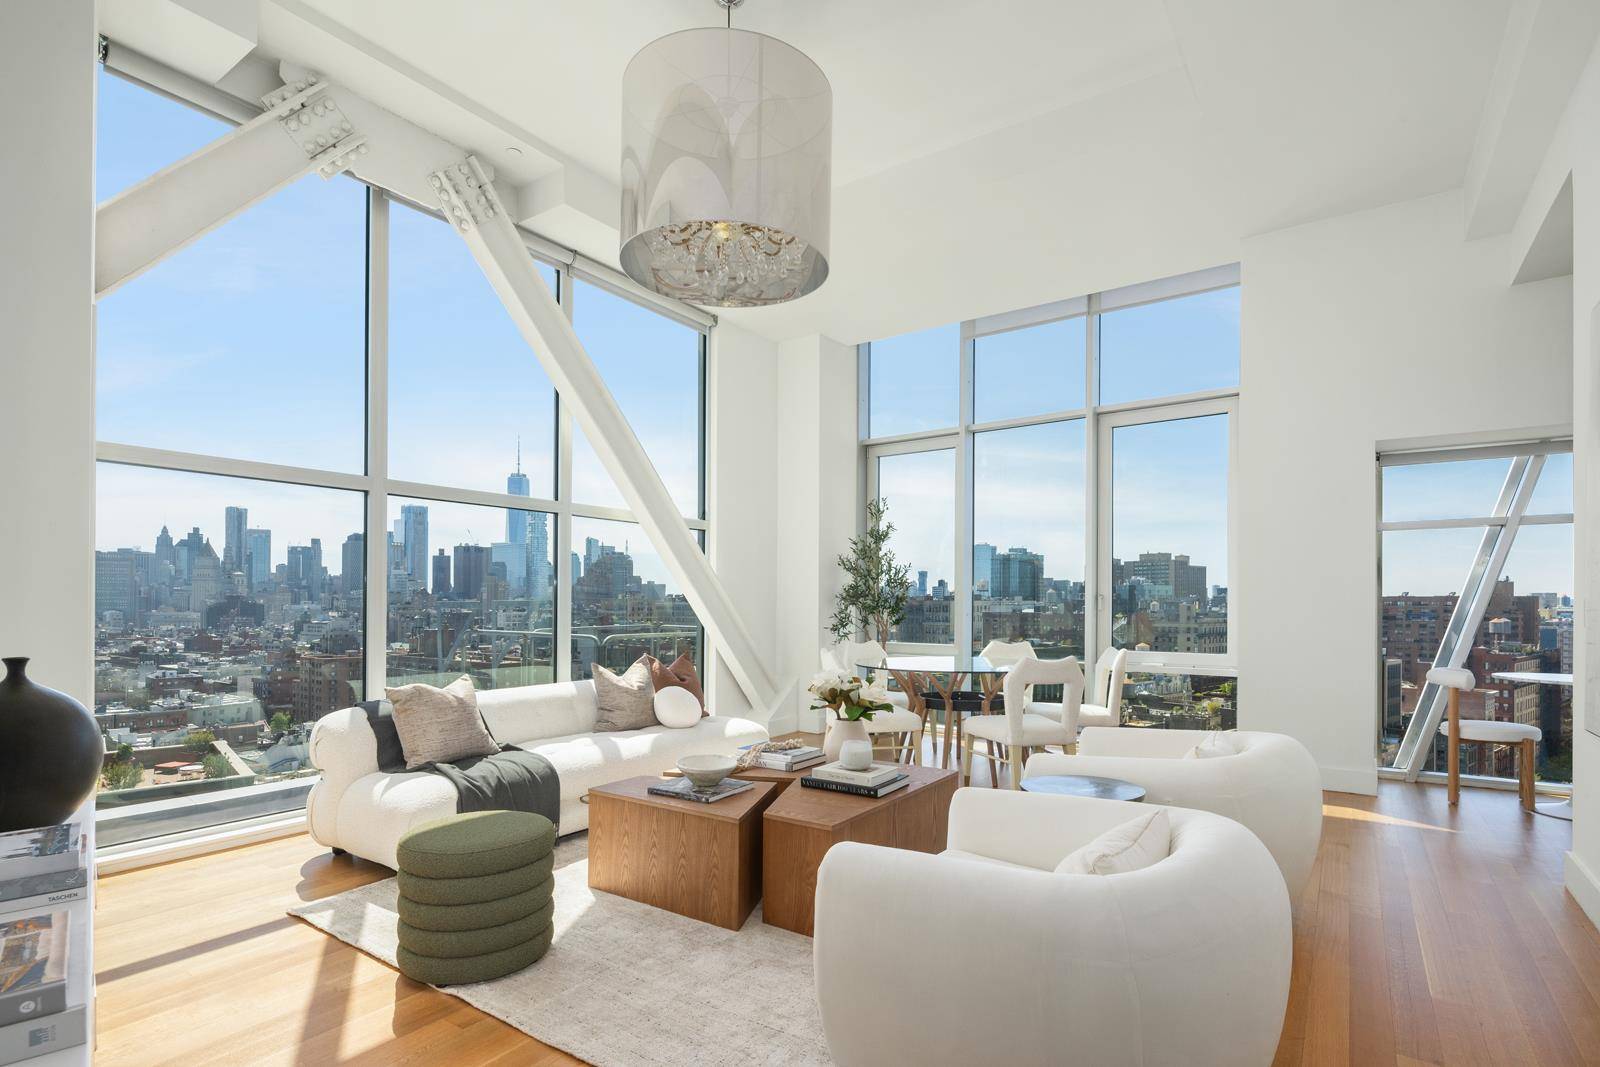 Rare full floor penthouse with 13 foot ceilings, floor to ceiling glass windows, and panoramic views in 52 East 4th Street, located perfectly on the Bowery at the nexus of ...